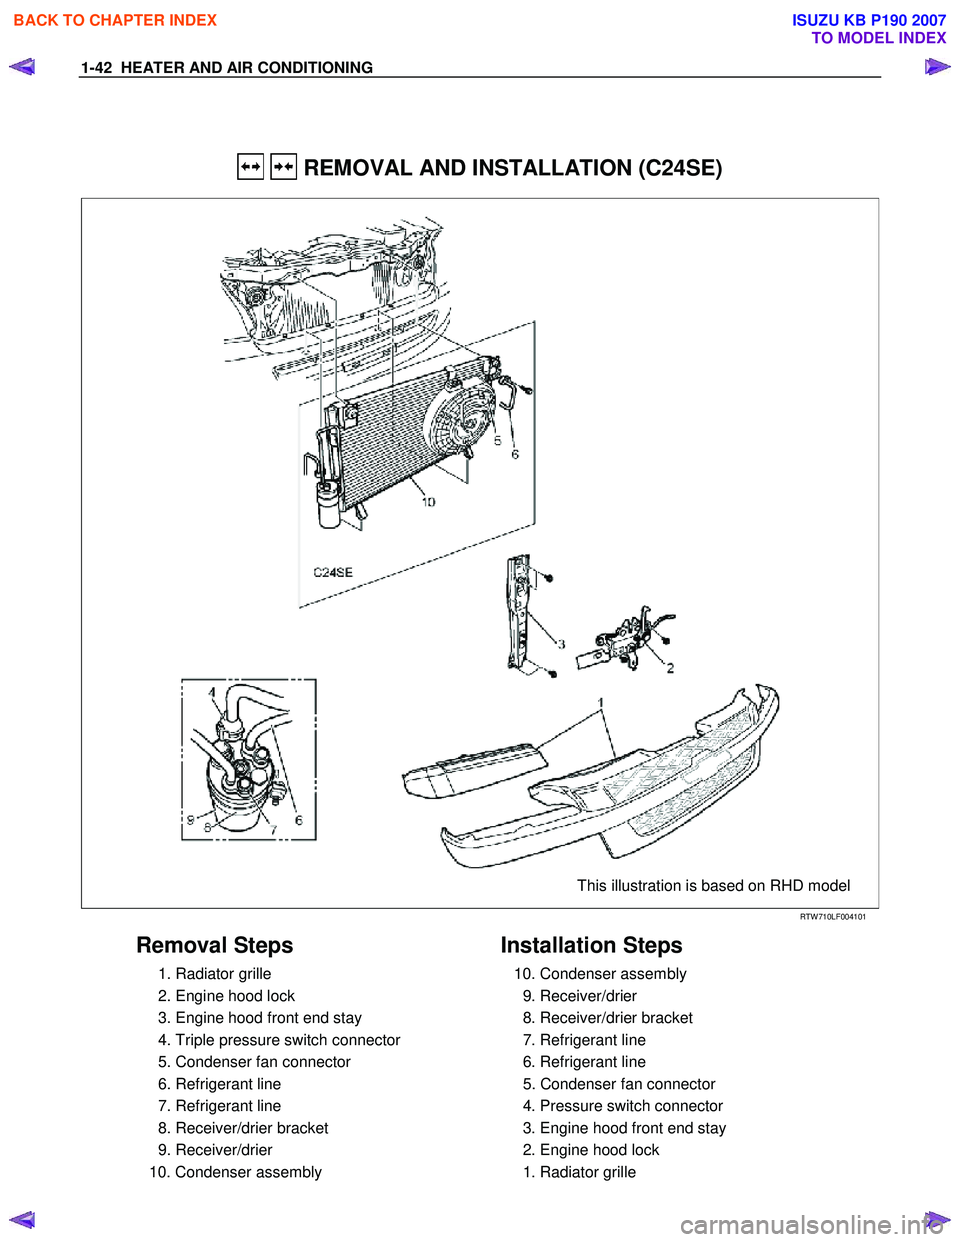 ISUZU KB P190 2007  Workshop Service Manual 1-42  HEATER AND AIR CONDITIONING 
 
  REMOVAL AND INSTALLATION (C24SE) 
  
 
 
 
This illustration is based on RHD model
 
 
RTW 710LF004101 
 
Removal Steps   
  1. Radiator grille  
  2. Engine hoo